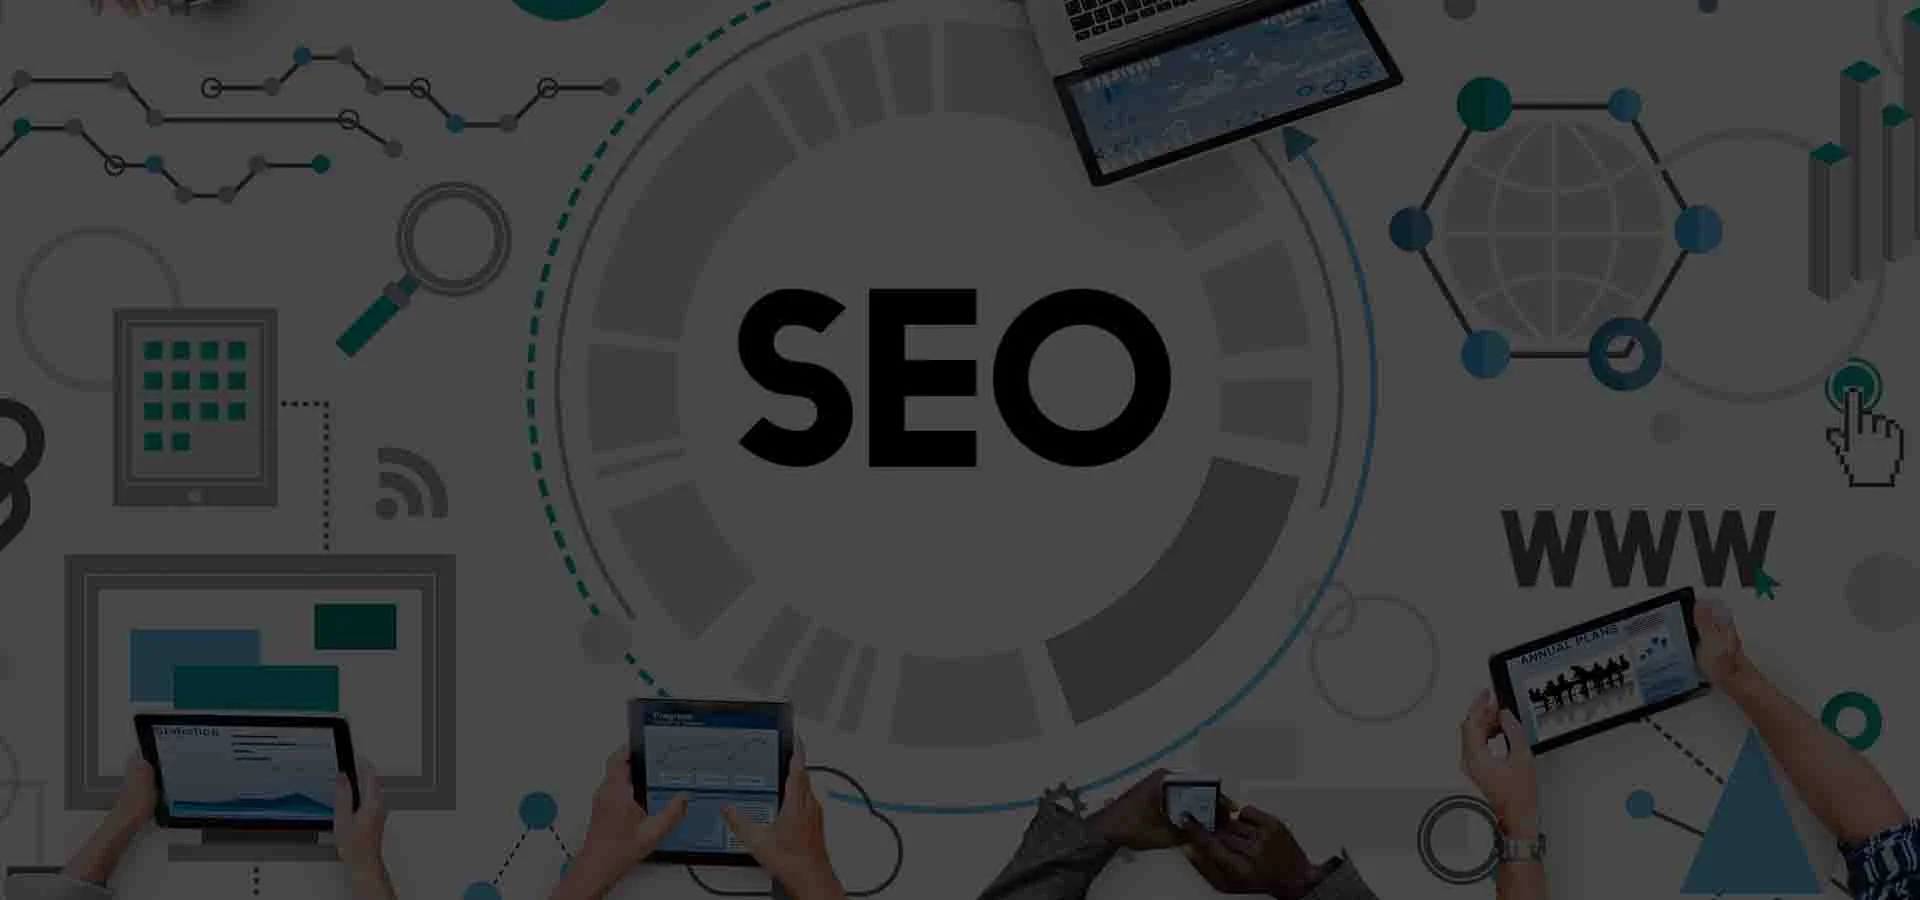 what-are-the-top-10-seo-tactics-beneficial-for-businesses-in-2020-related-blog-19